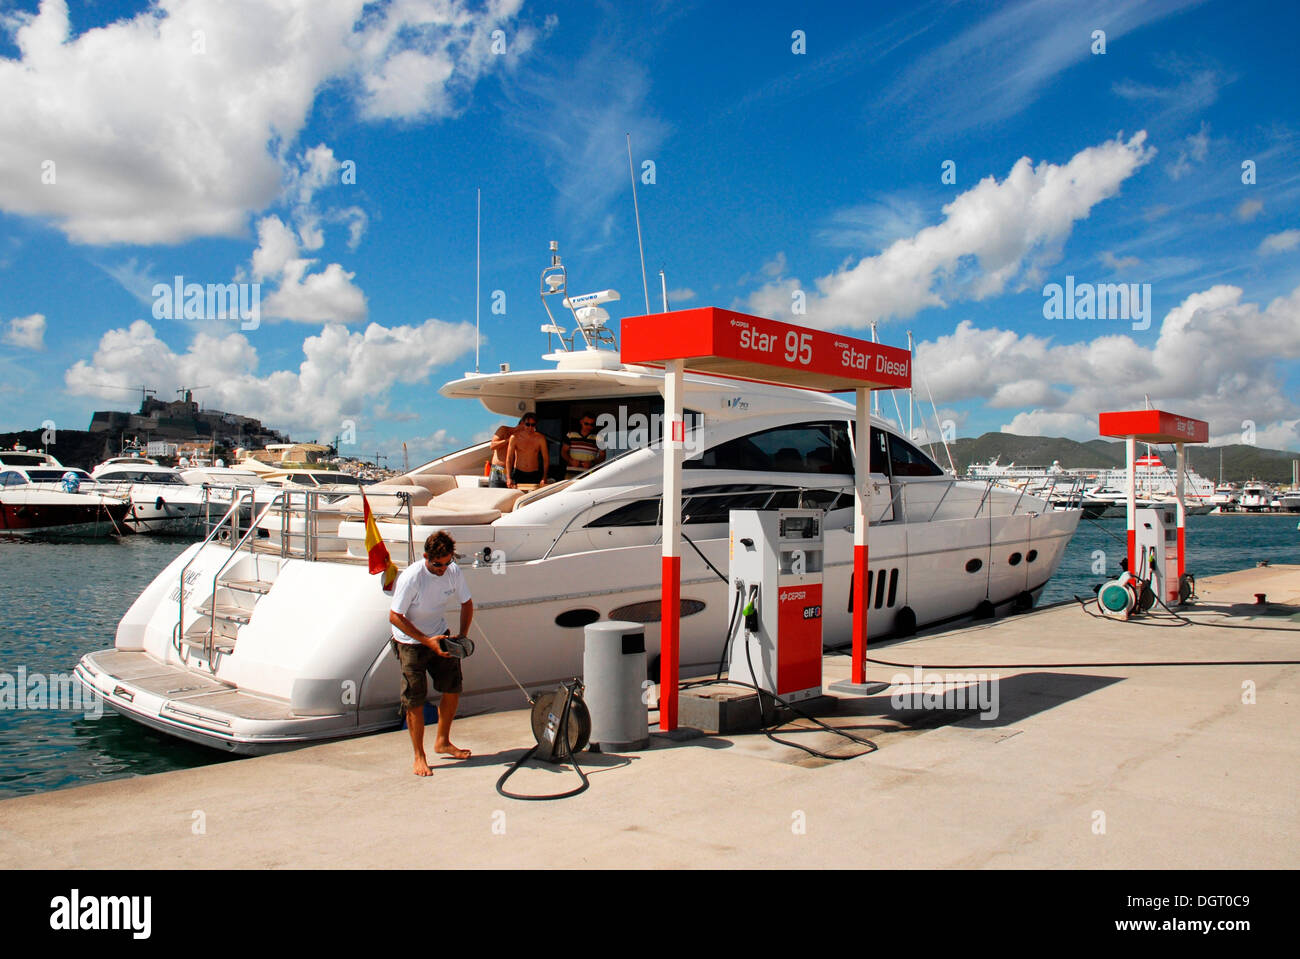 Boat and yacht petrol station of Cepsa Elf in the port of Ibiza, Spain, Europe Stock Photo